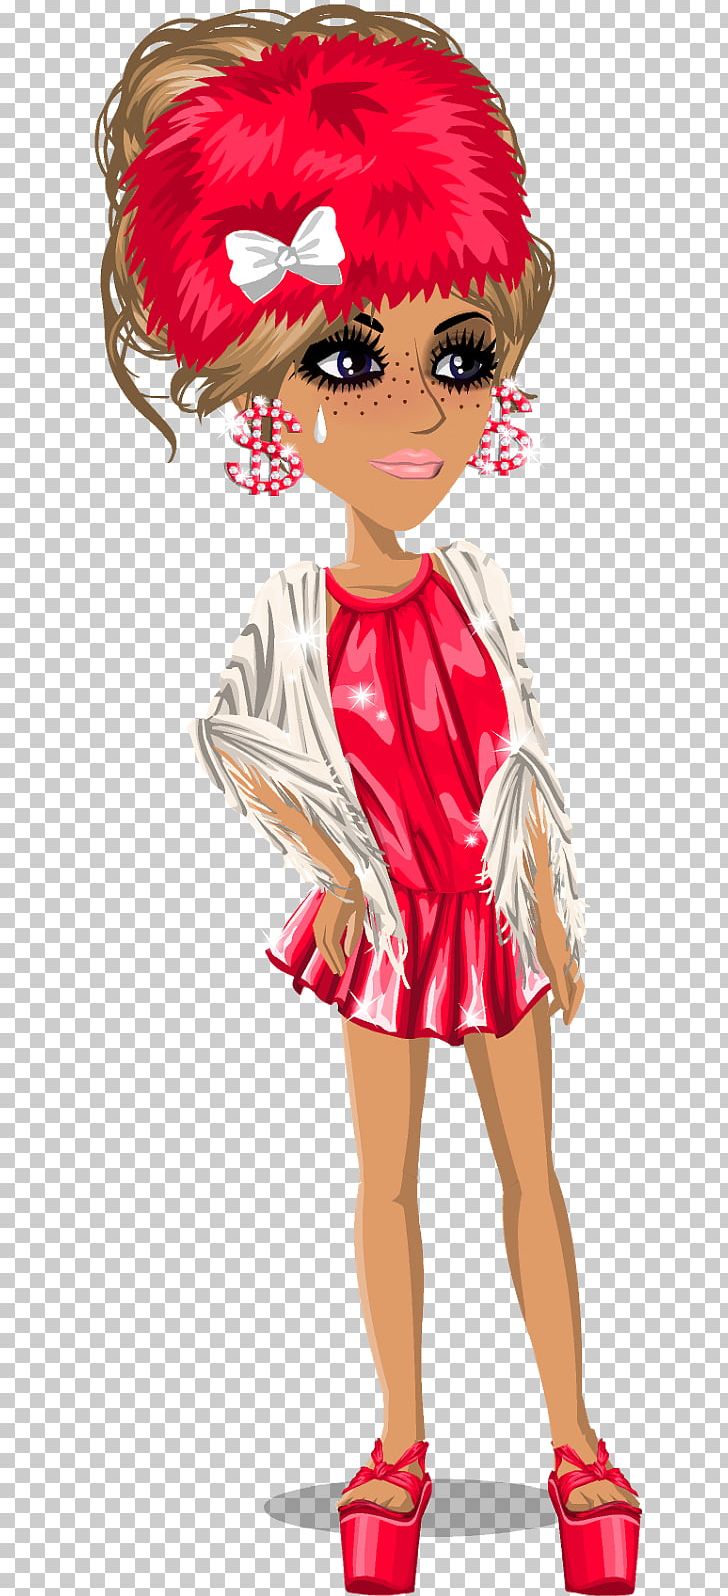 MovieStarPlanet Drawing Character Art PNG, Clipart, Anime, Art, Barbie, Brown Hair, Cartoon Free PNG Download